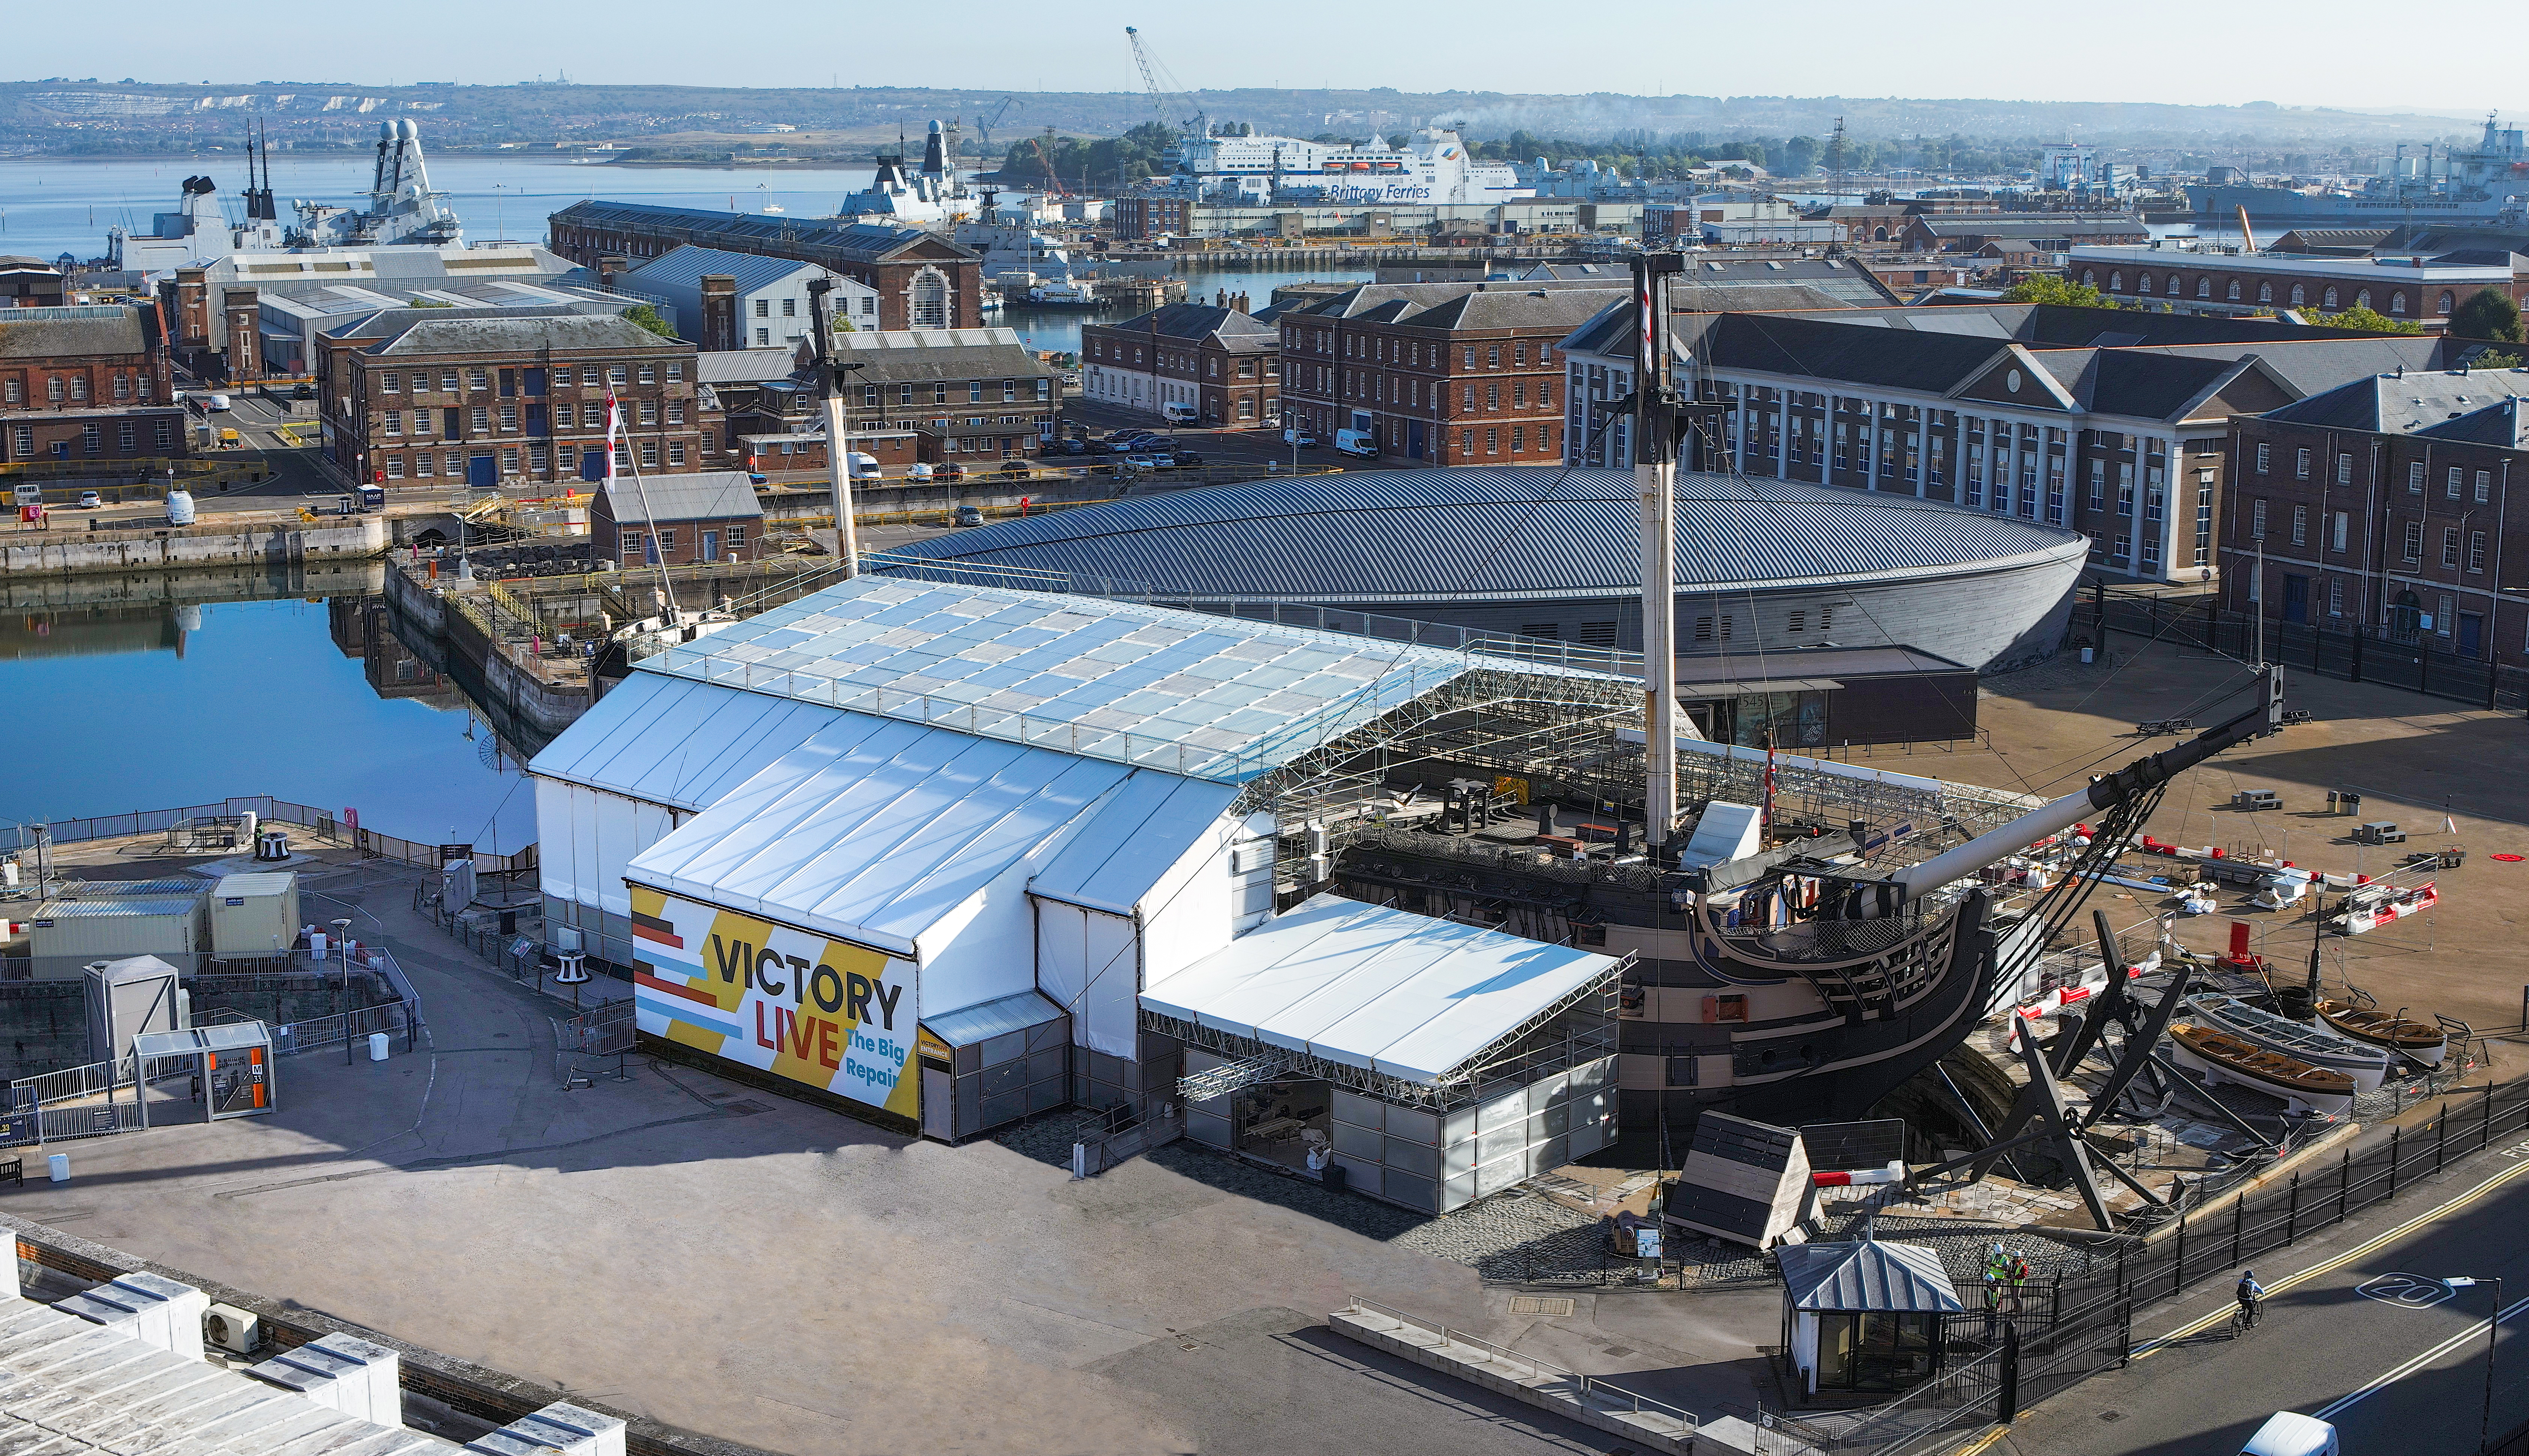 Aerial photo of HMS Victory: Victory Live Experience